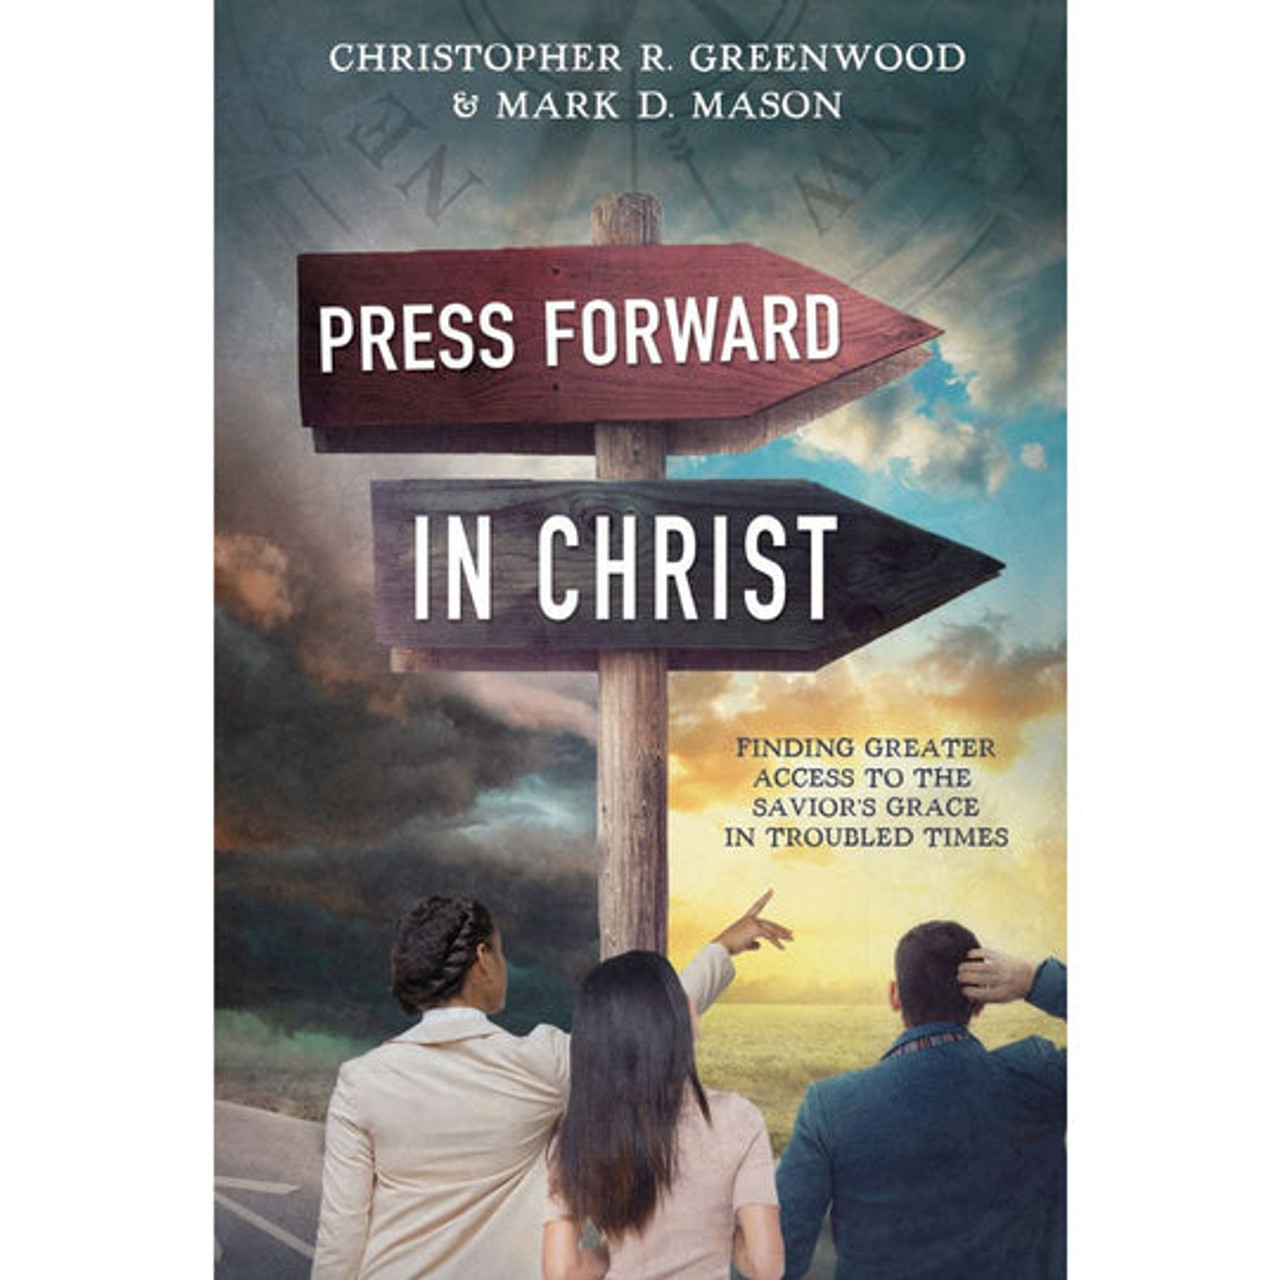 Press Forward in Christ: Finding Greater Access to the Savior's Grace in Troubled Times (Paperback)*